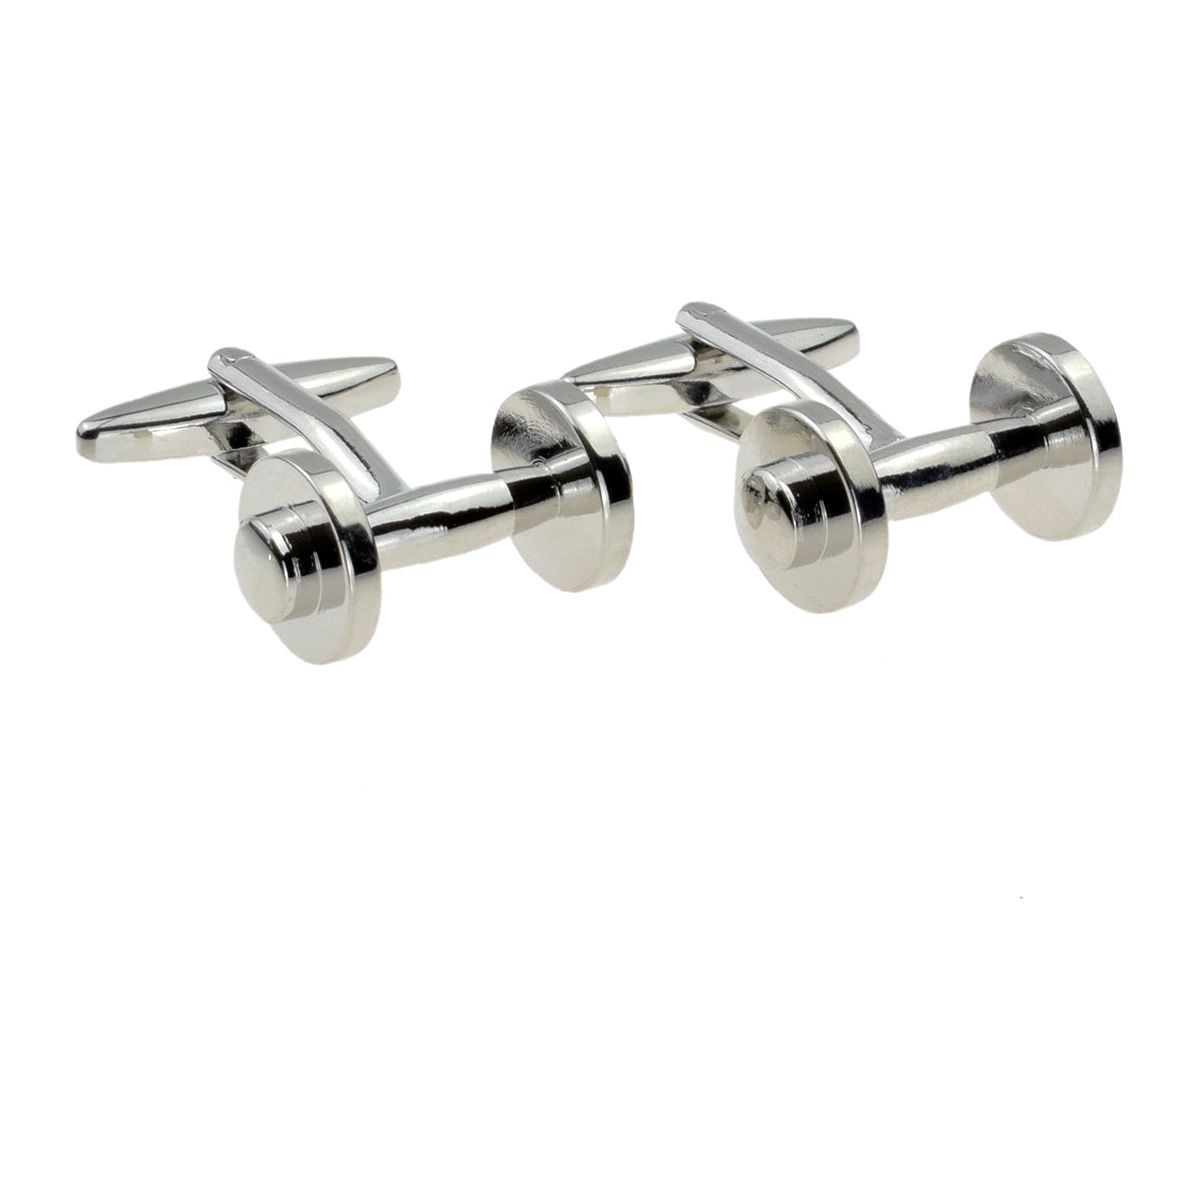 Weight Lifter Dumbbell Gym Sports Cufflinks - Ashton and Finch